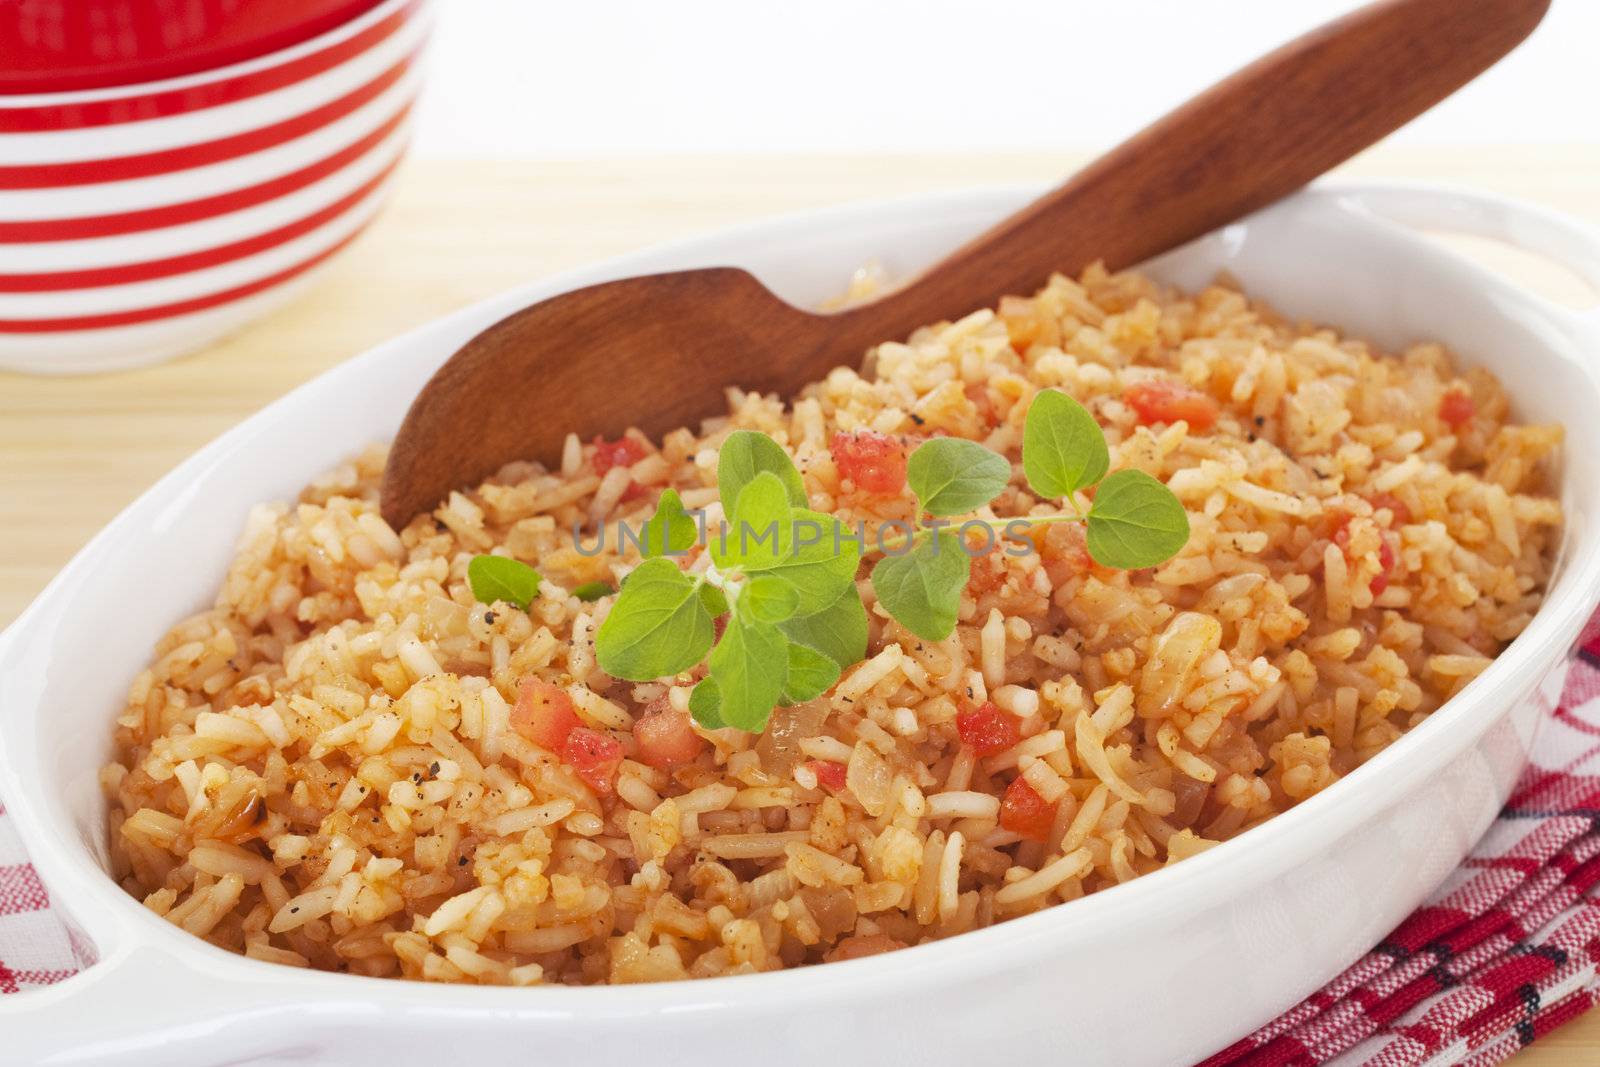 Spanish Rice Mexican Food by Travelling-light